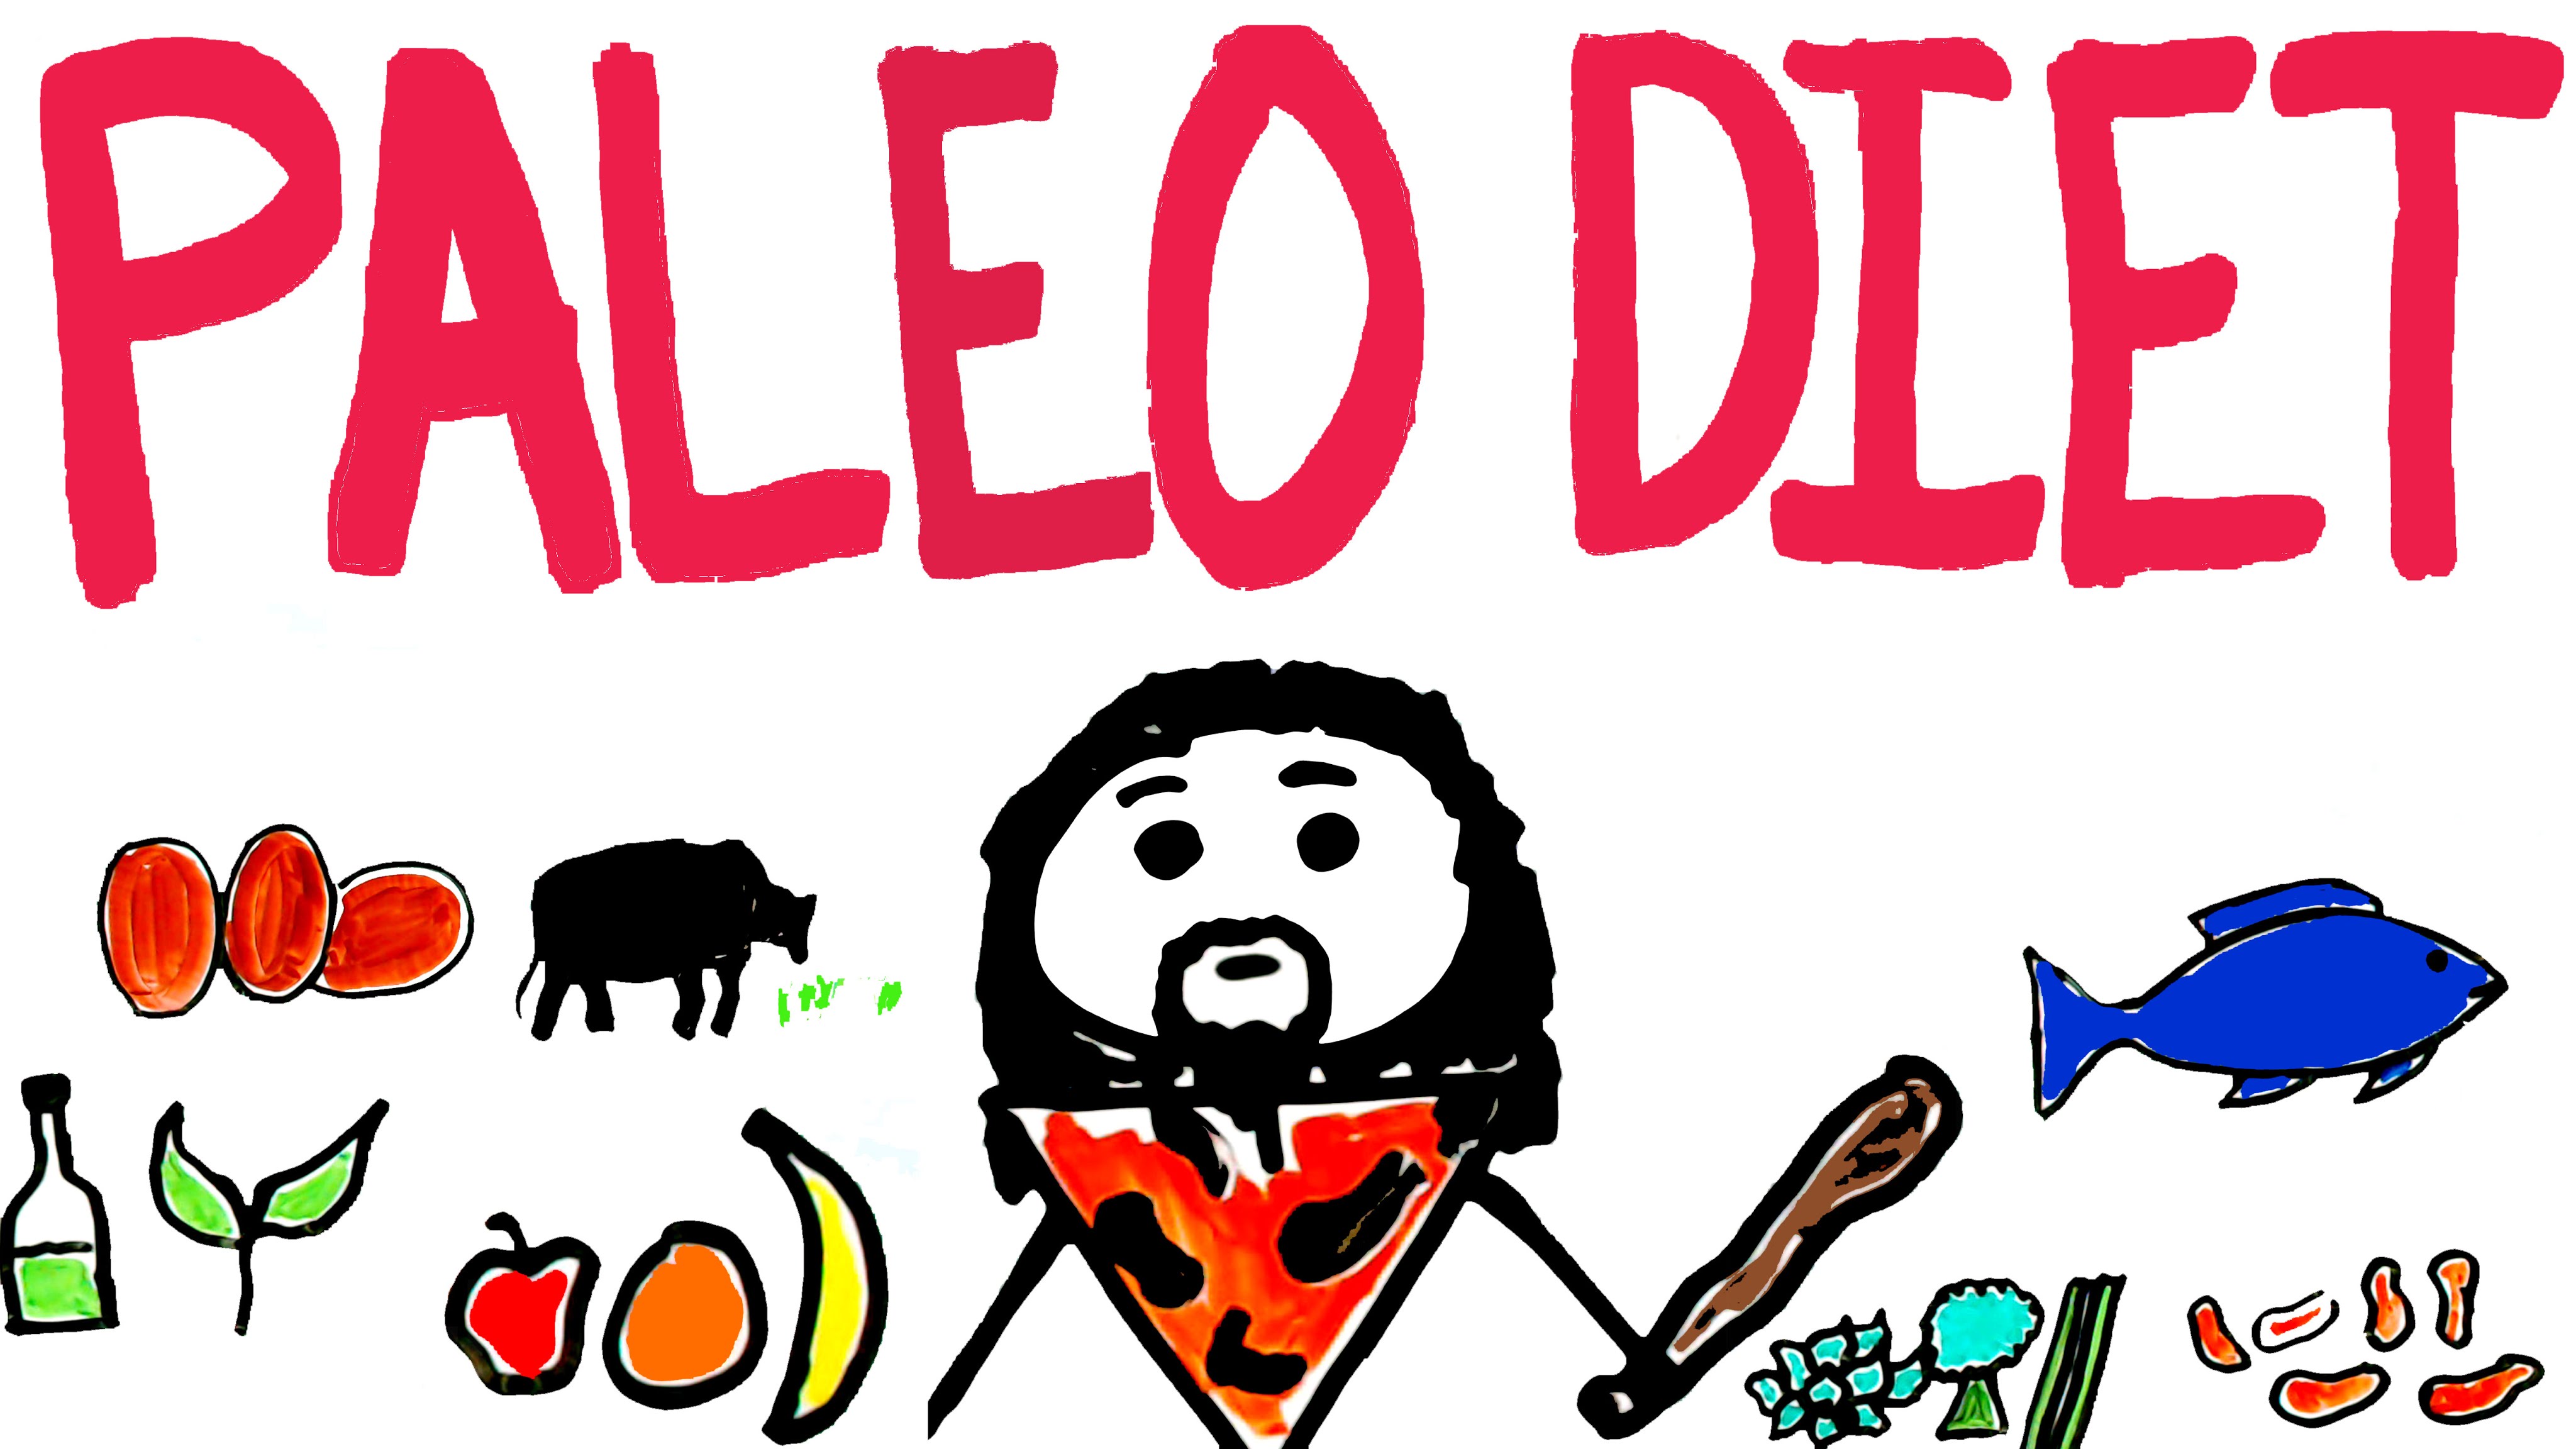 Eating style all you. Caveman clipart neolithic era